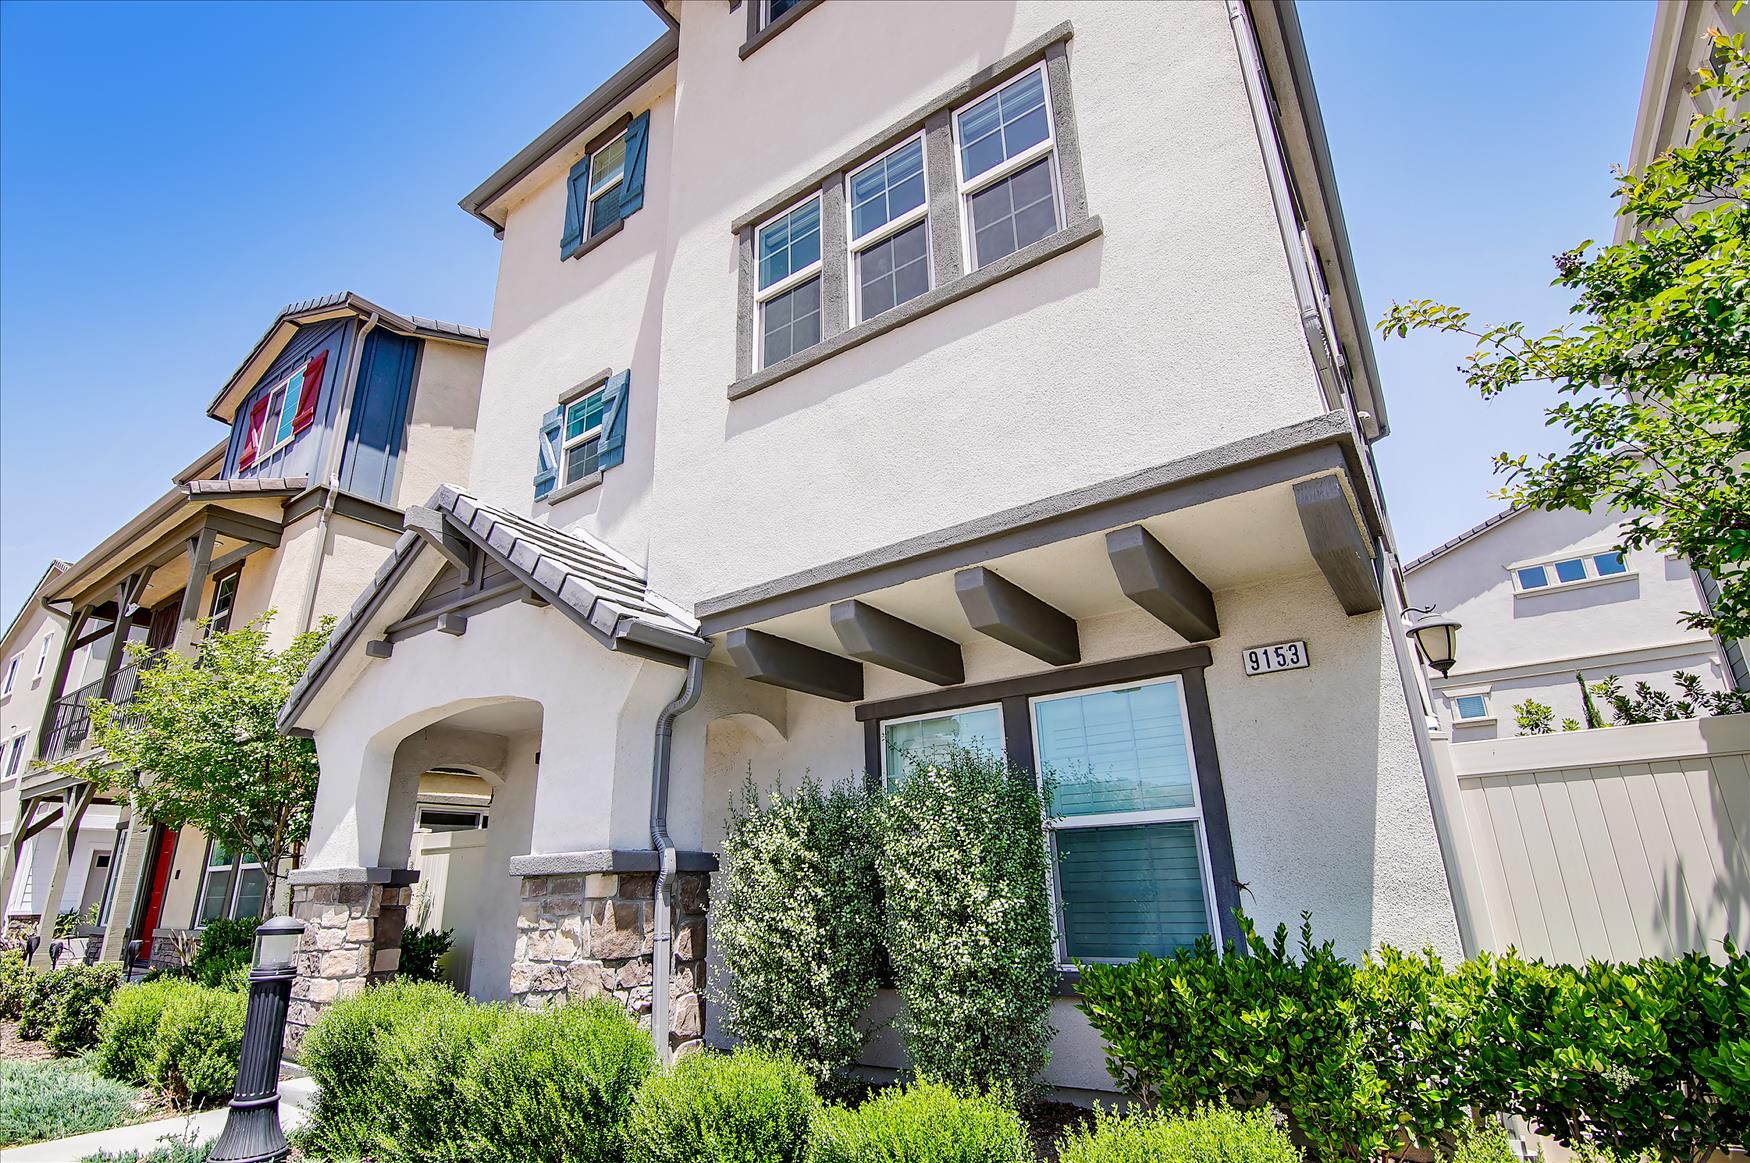 Beautiful Chatsworth, Los Angeles, CA house showcasing the best property management services